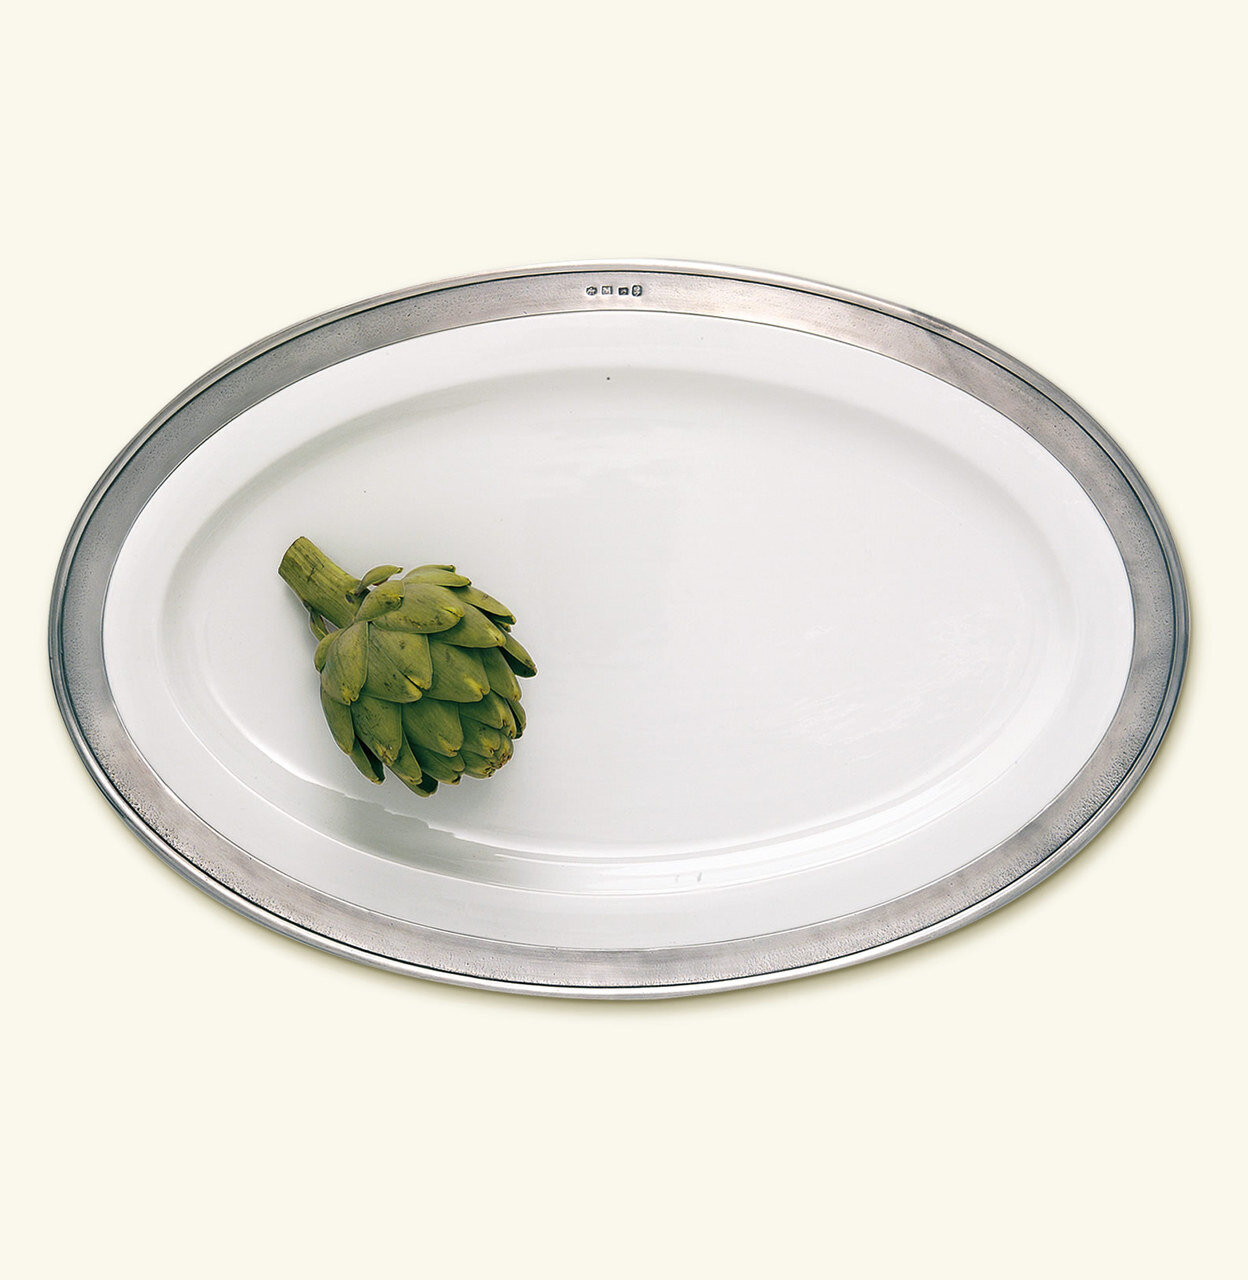 Match Pewter Convivio Oval Serving Platter - White